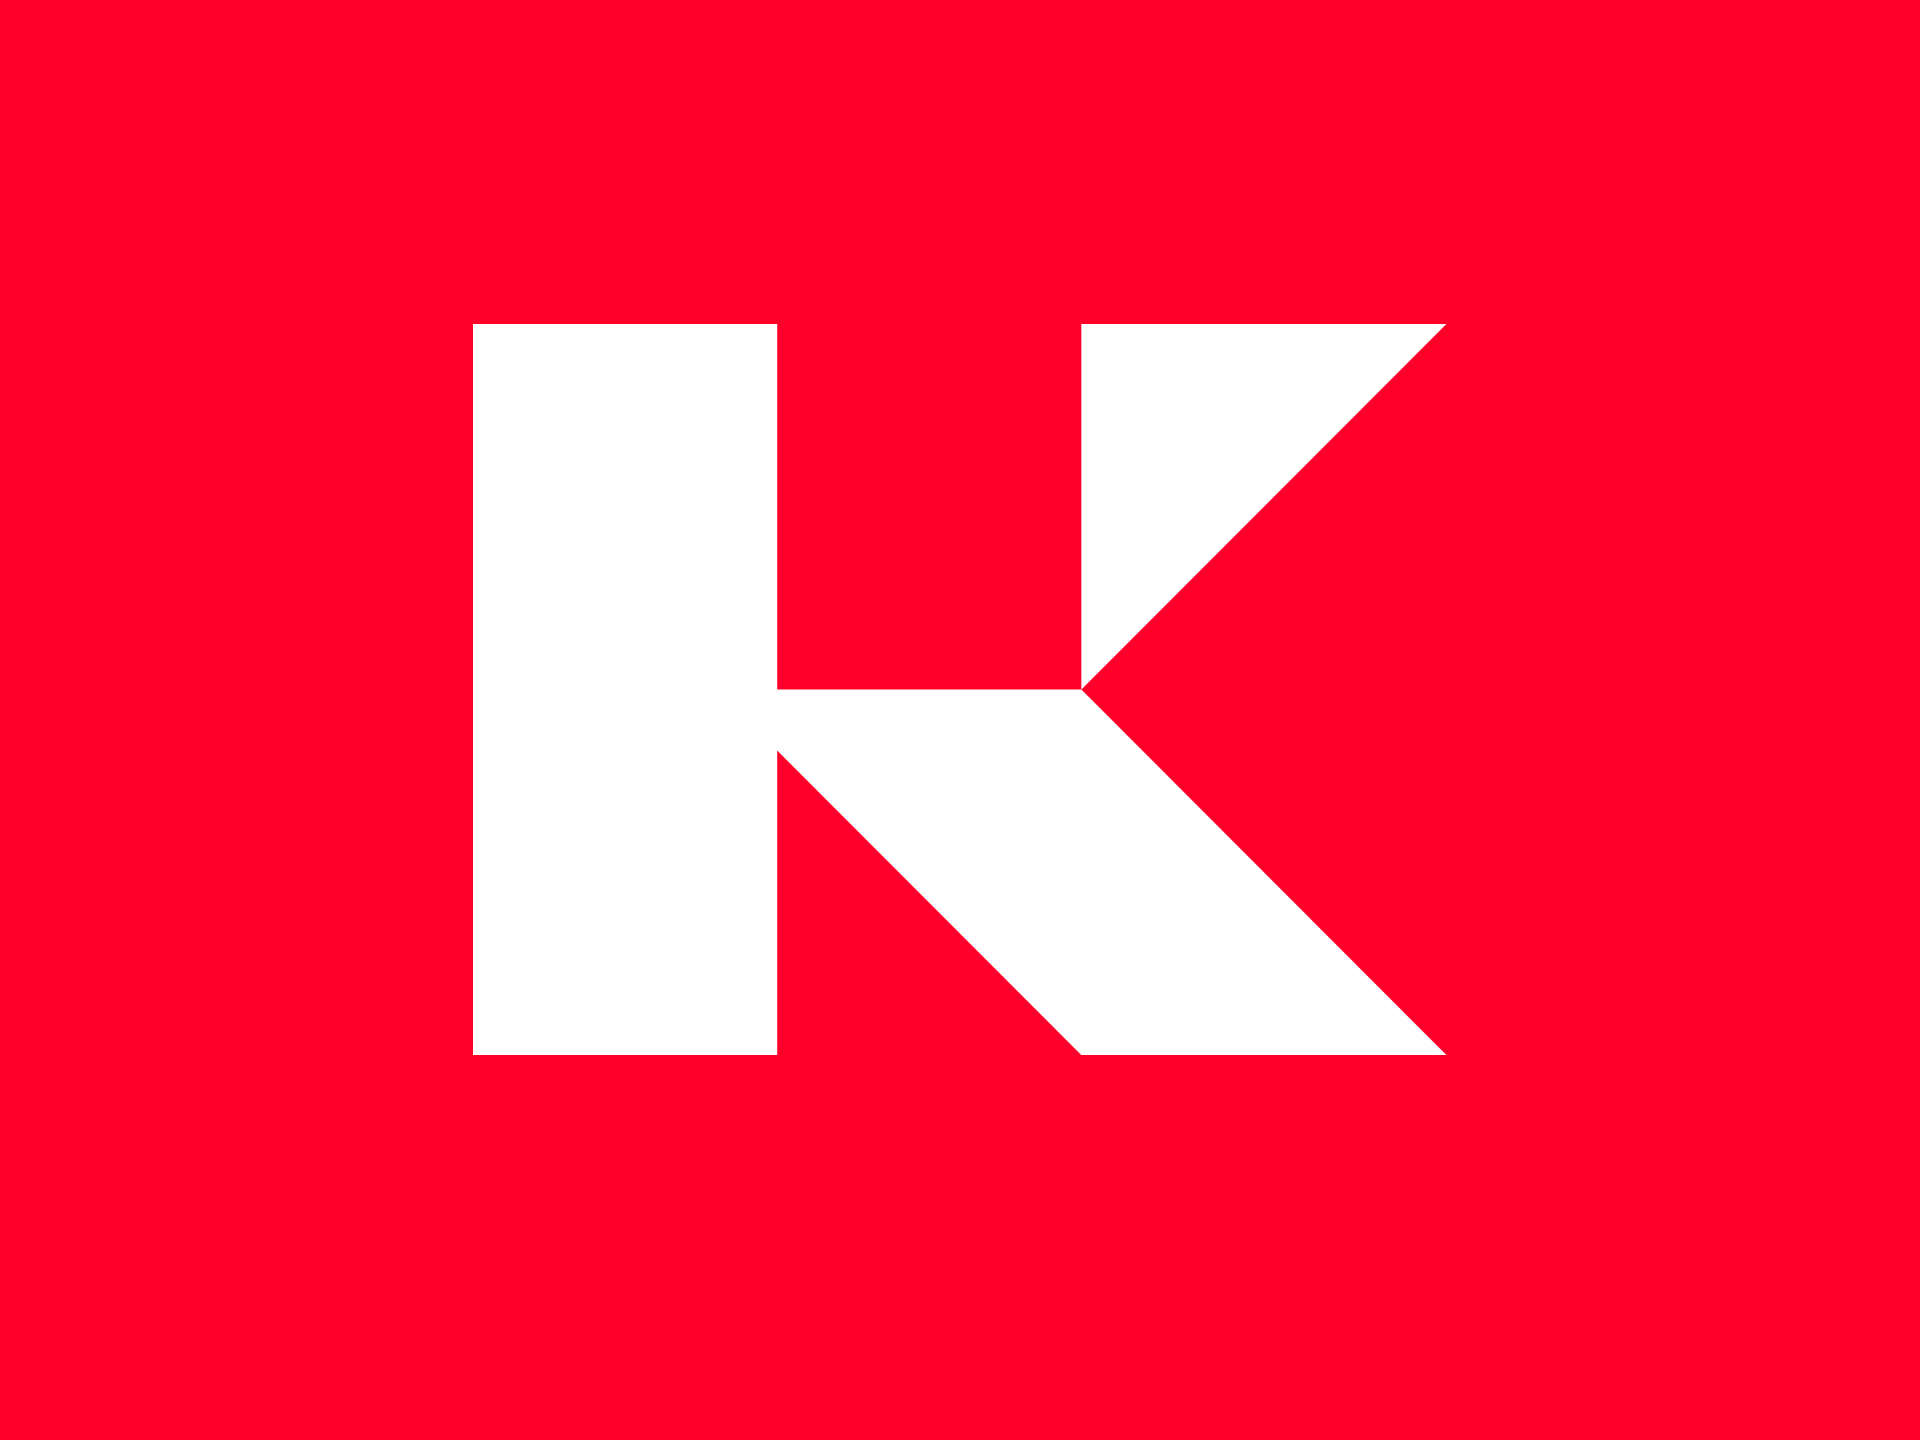 kkr-purchases-kobalt-capitals-fund-ii-music-rights-portfolio-for-approximately-11-billion.png